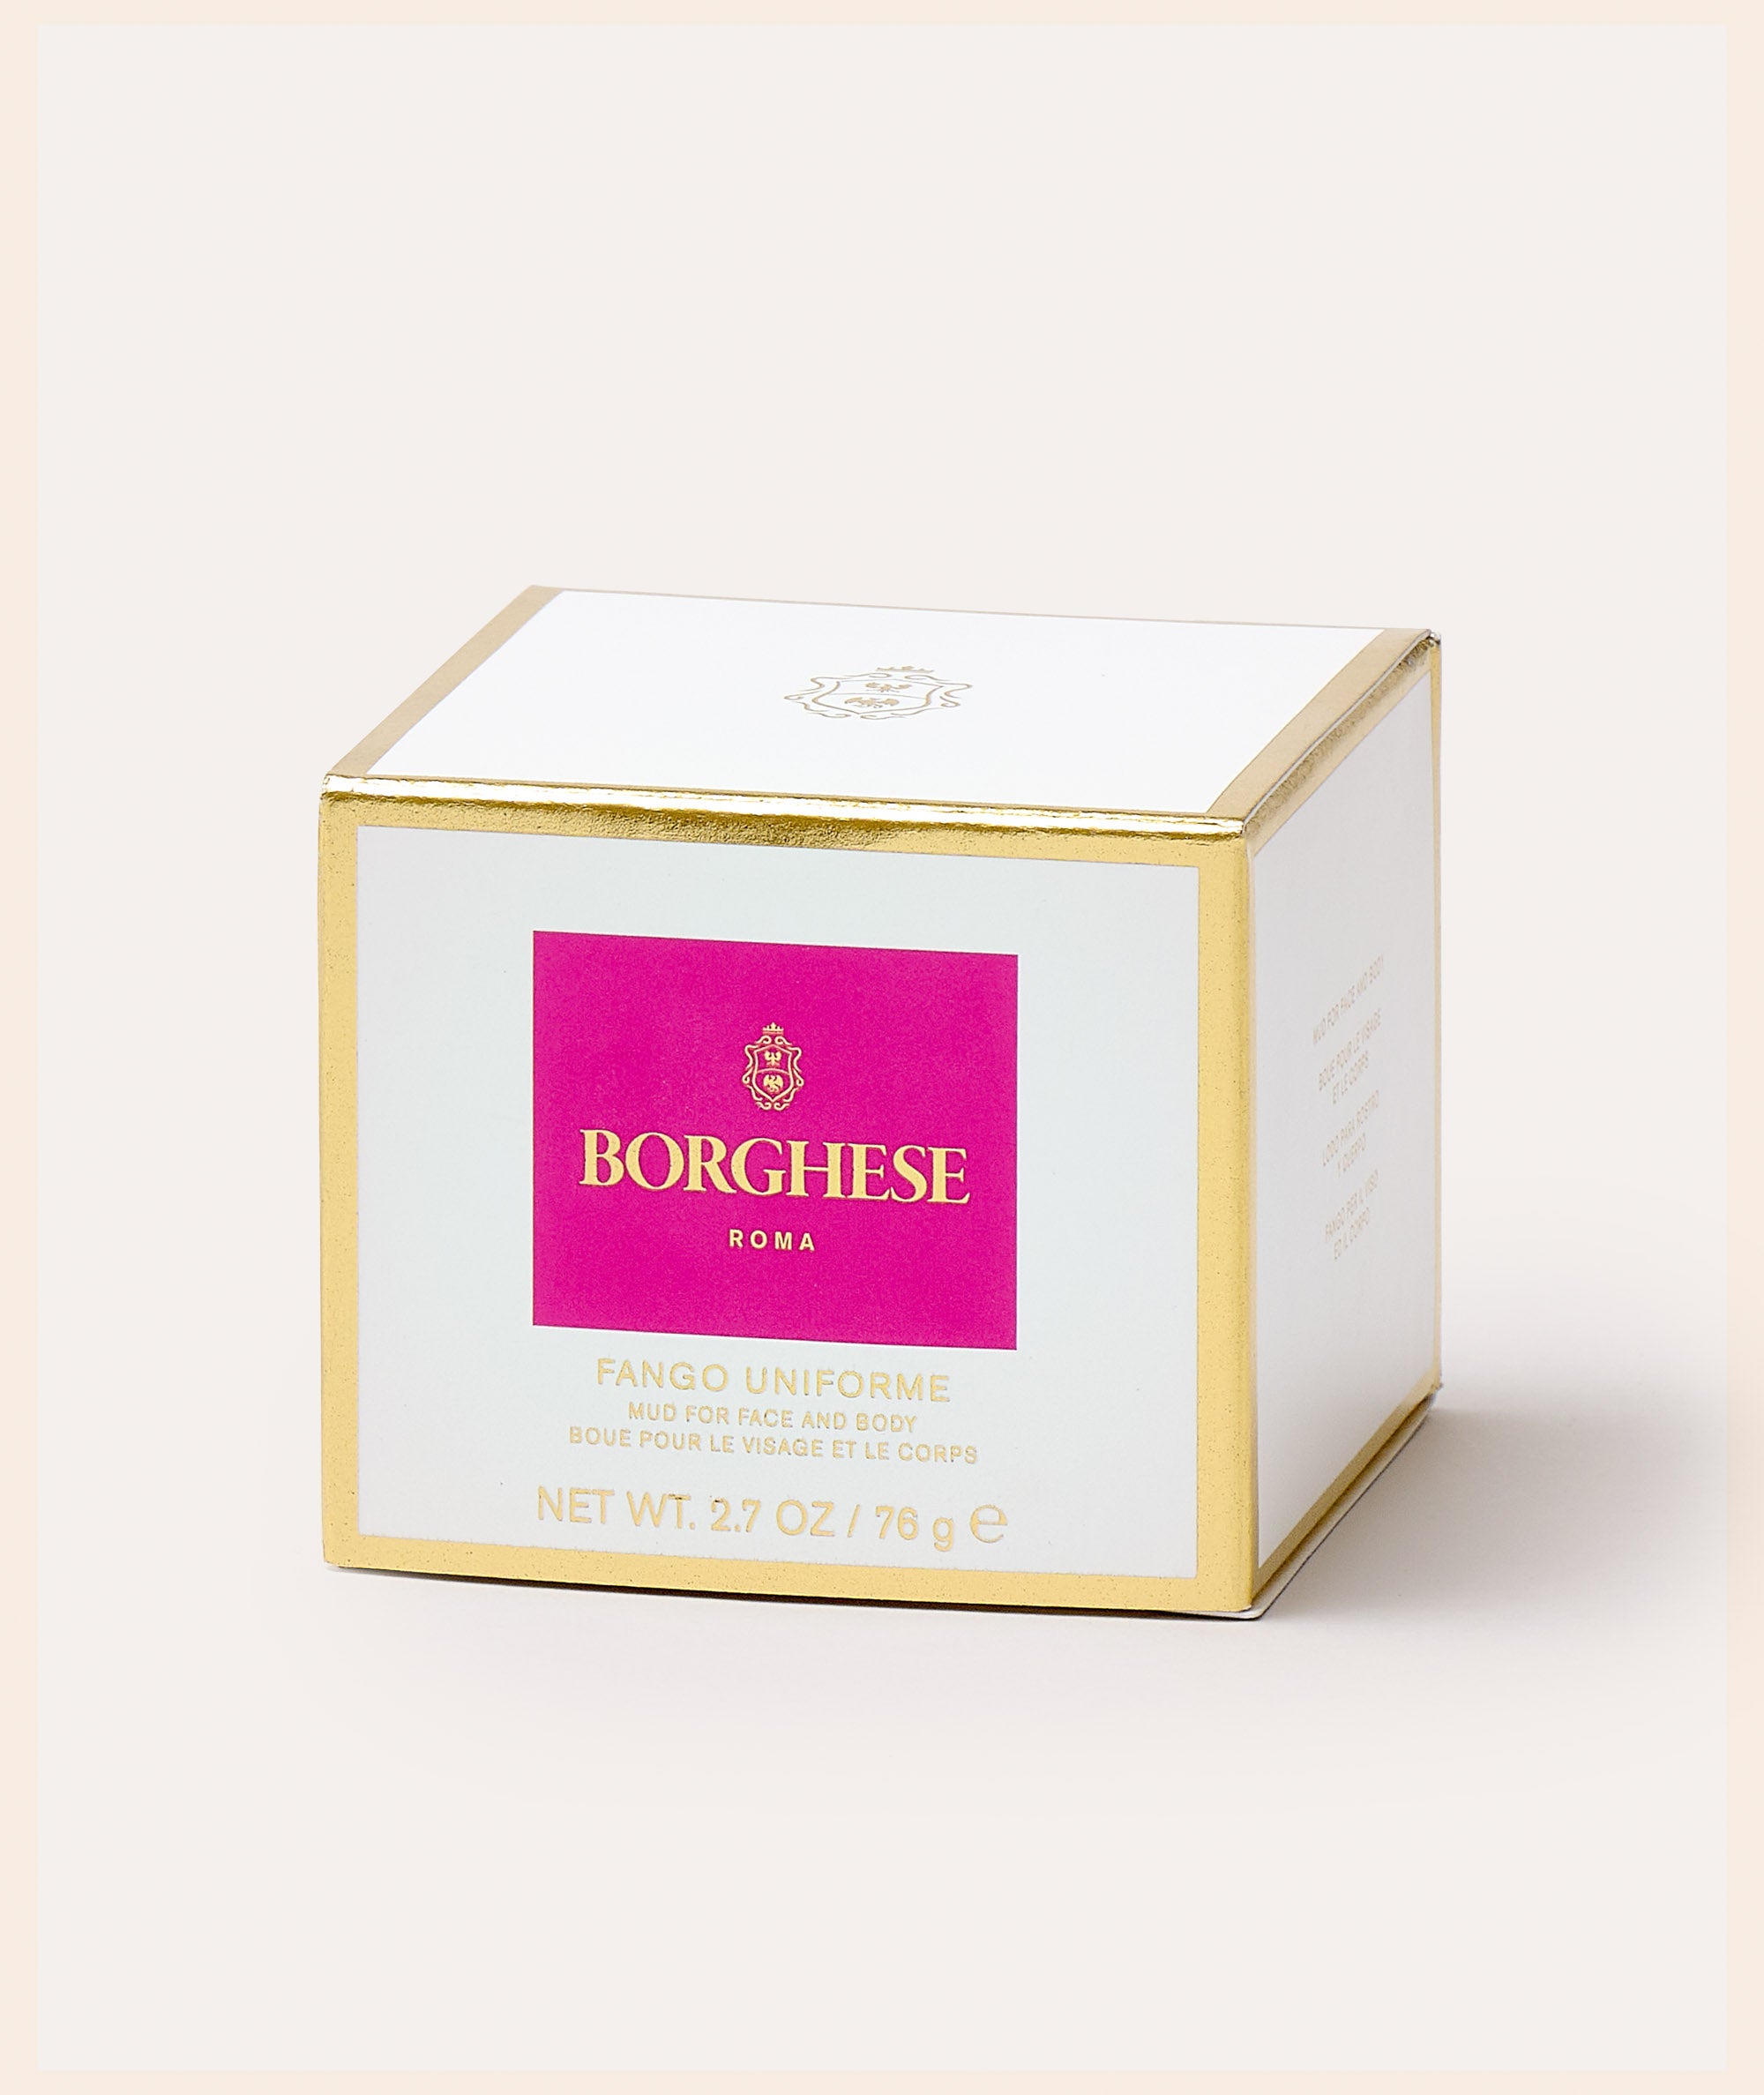 This is a picture of the Borghese Fango Uniforme Brightening Mud Mask in a white box